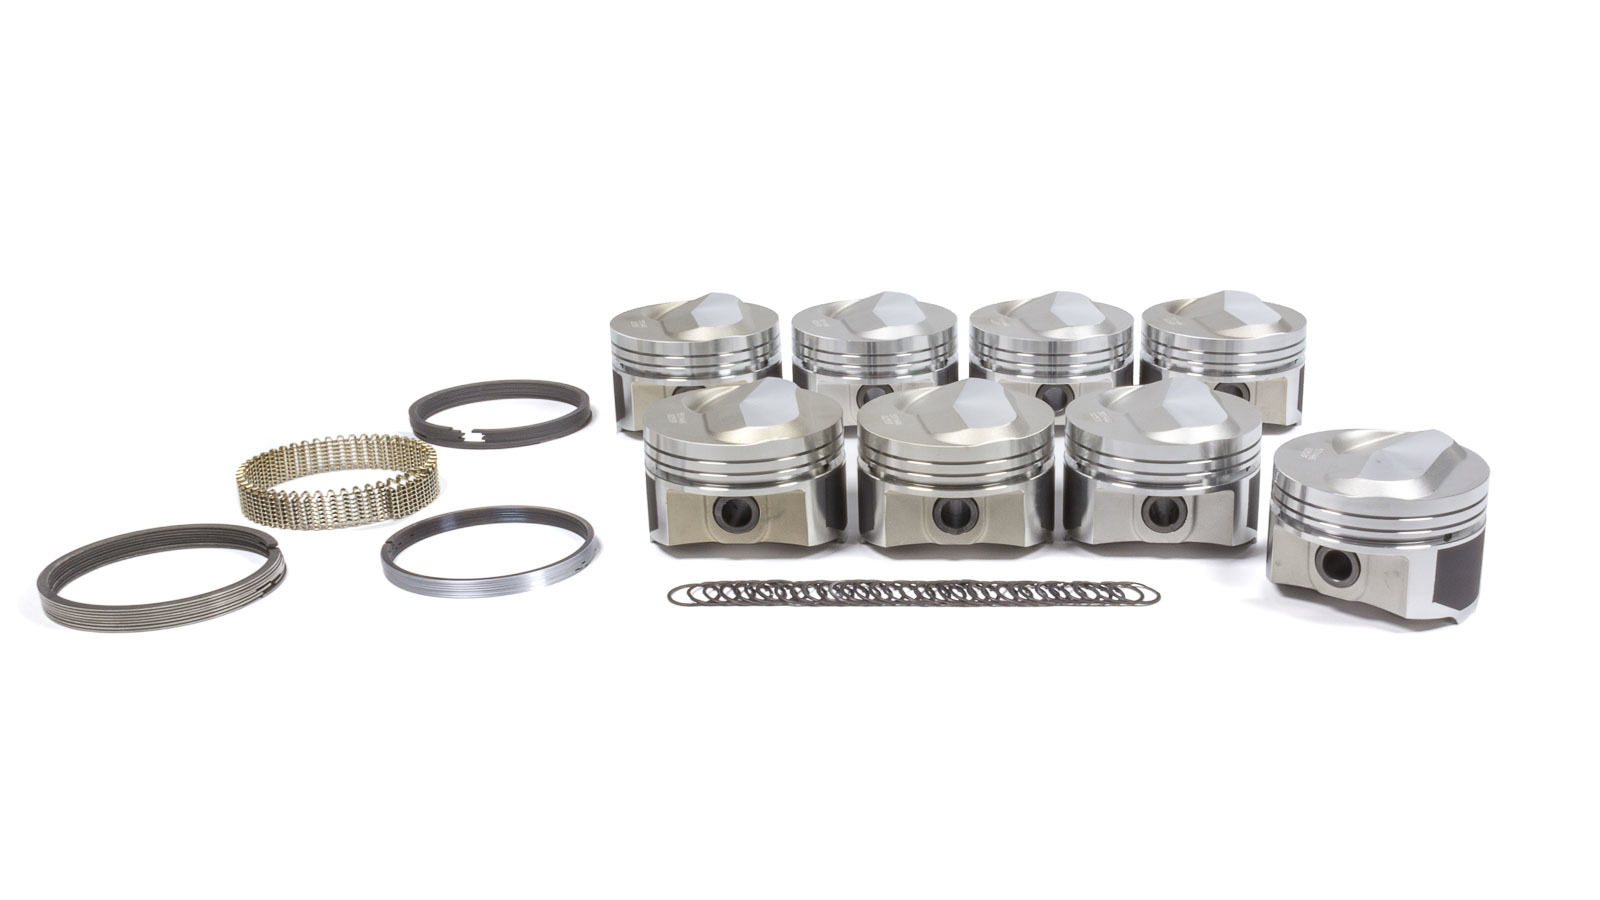 Wiseco Pro-Tru Pistons PTS514A6 Piston and Ring, Chevy Big Block Dome, Forged, 4.310 in Bore, 1/16 x 1/16 x 3/16 in Ring Grooves, Plus 21.00 cc, Big Block Chevy, Kit